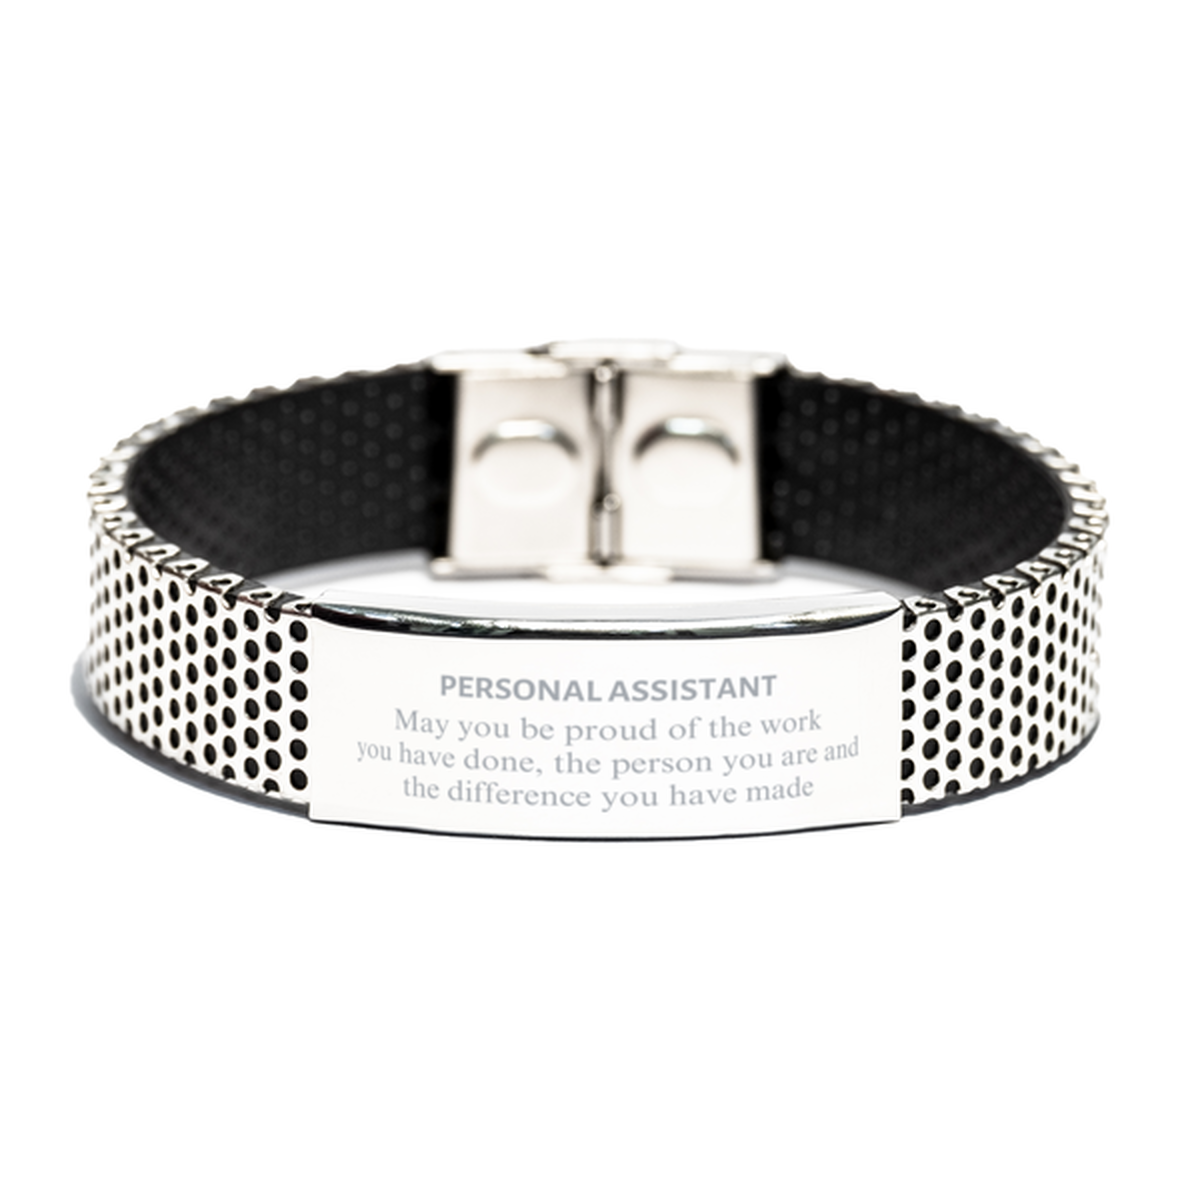 Personal Assistant May you be proud of the work you have done, Retirement Personal Assistant Stainless Steel Bracelet for Colleague Appreciation Gifts Amazing for Personal Assistant